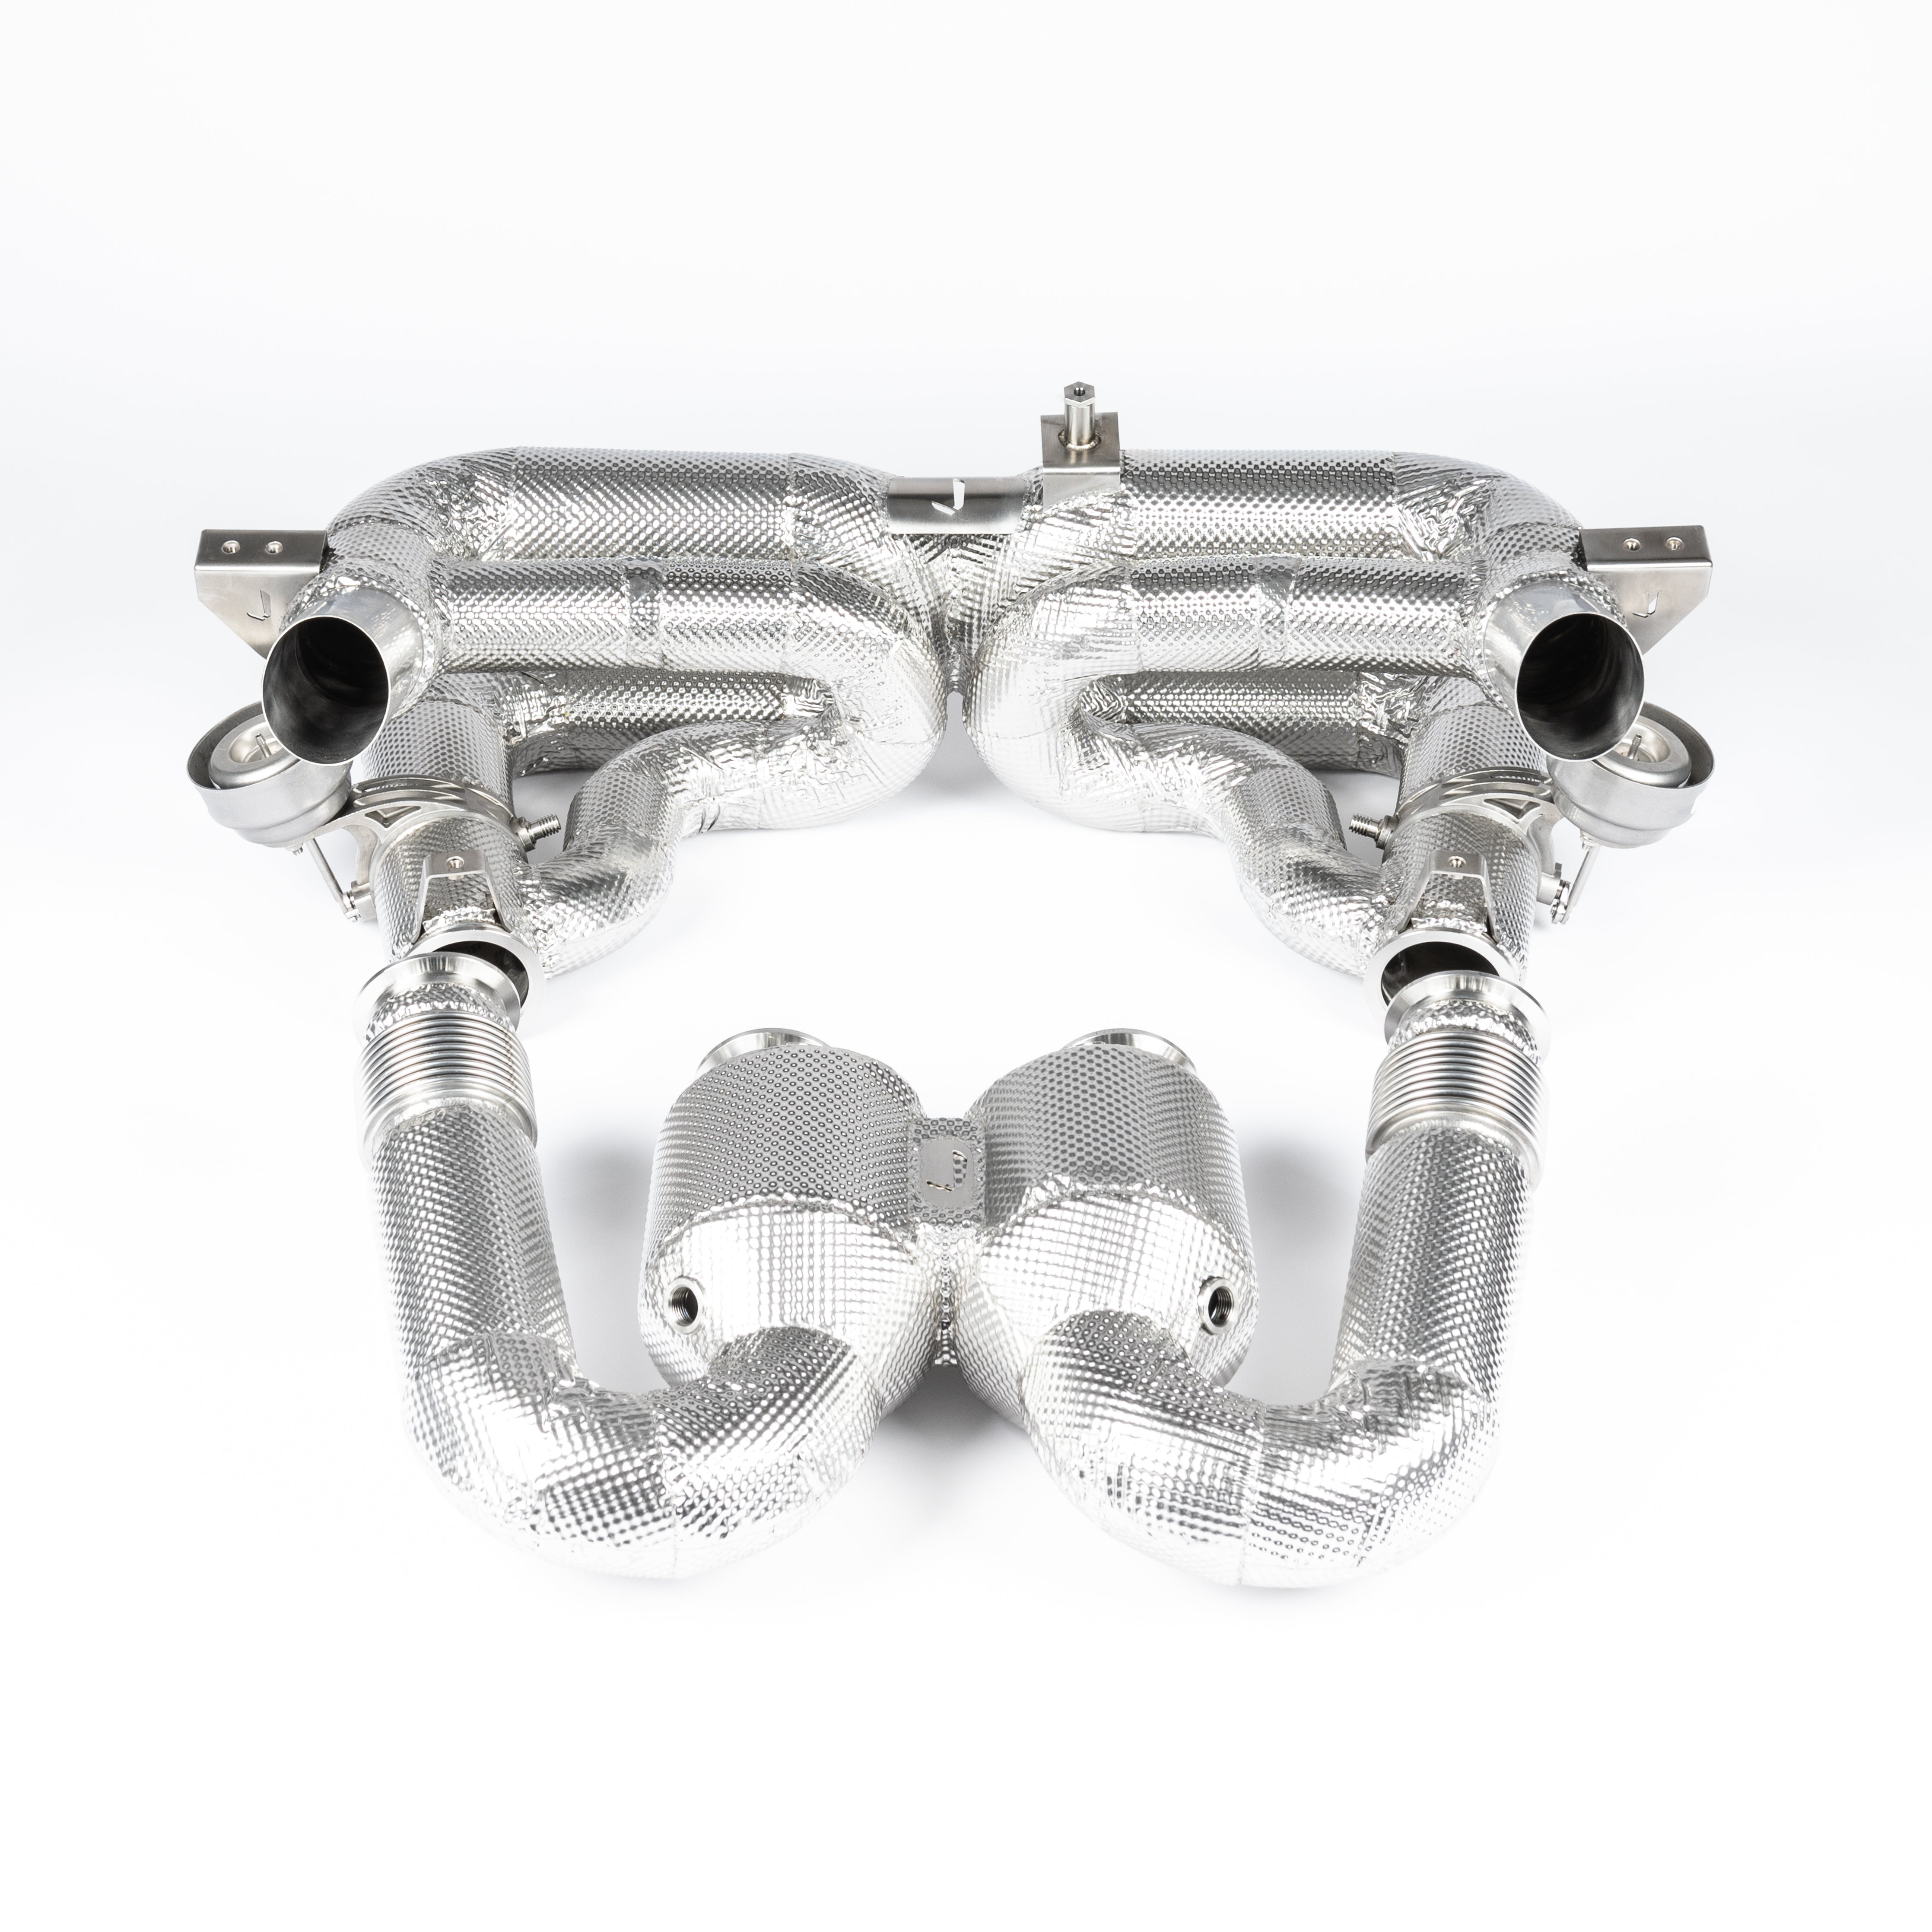 918 SPYDER INCONEL VALVED RACE PIPE & RACE CATS